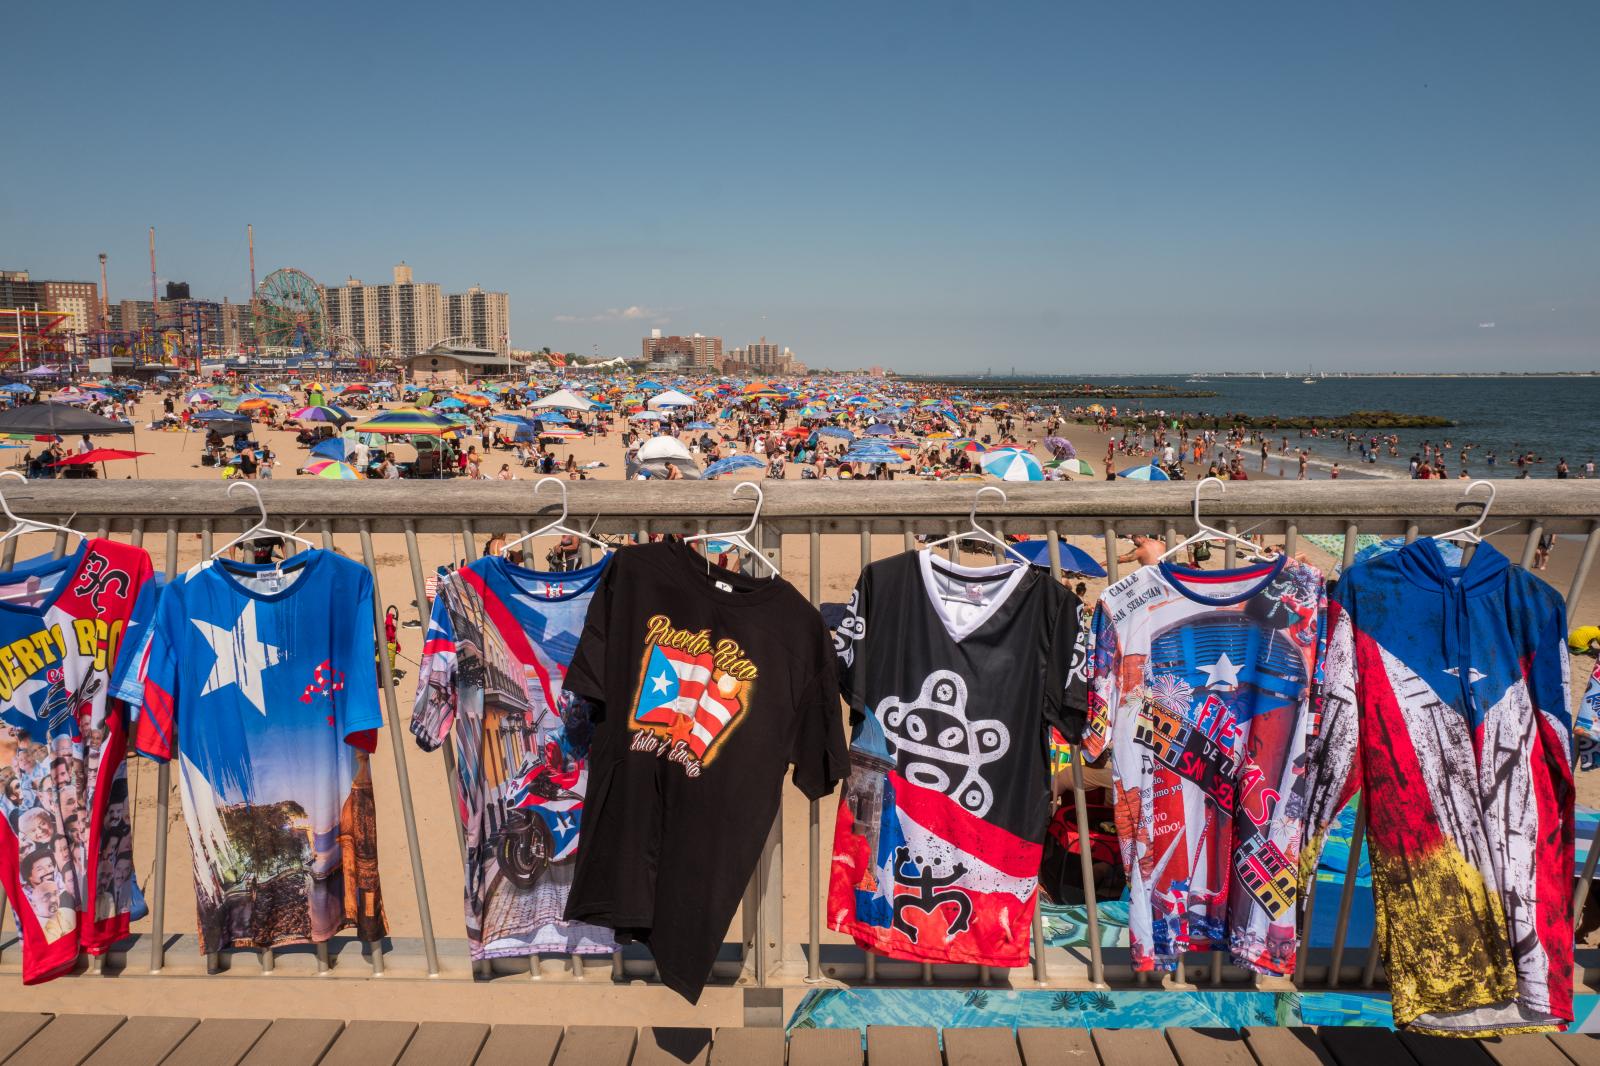 T-shirts, Coney Island, July 2022 | Buy this image